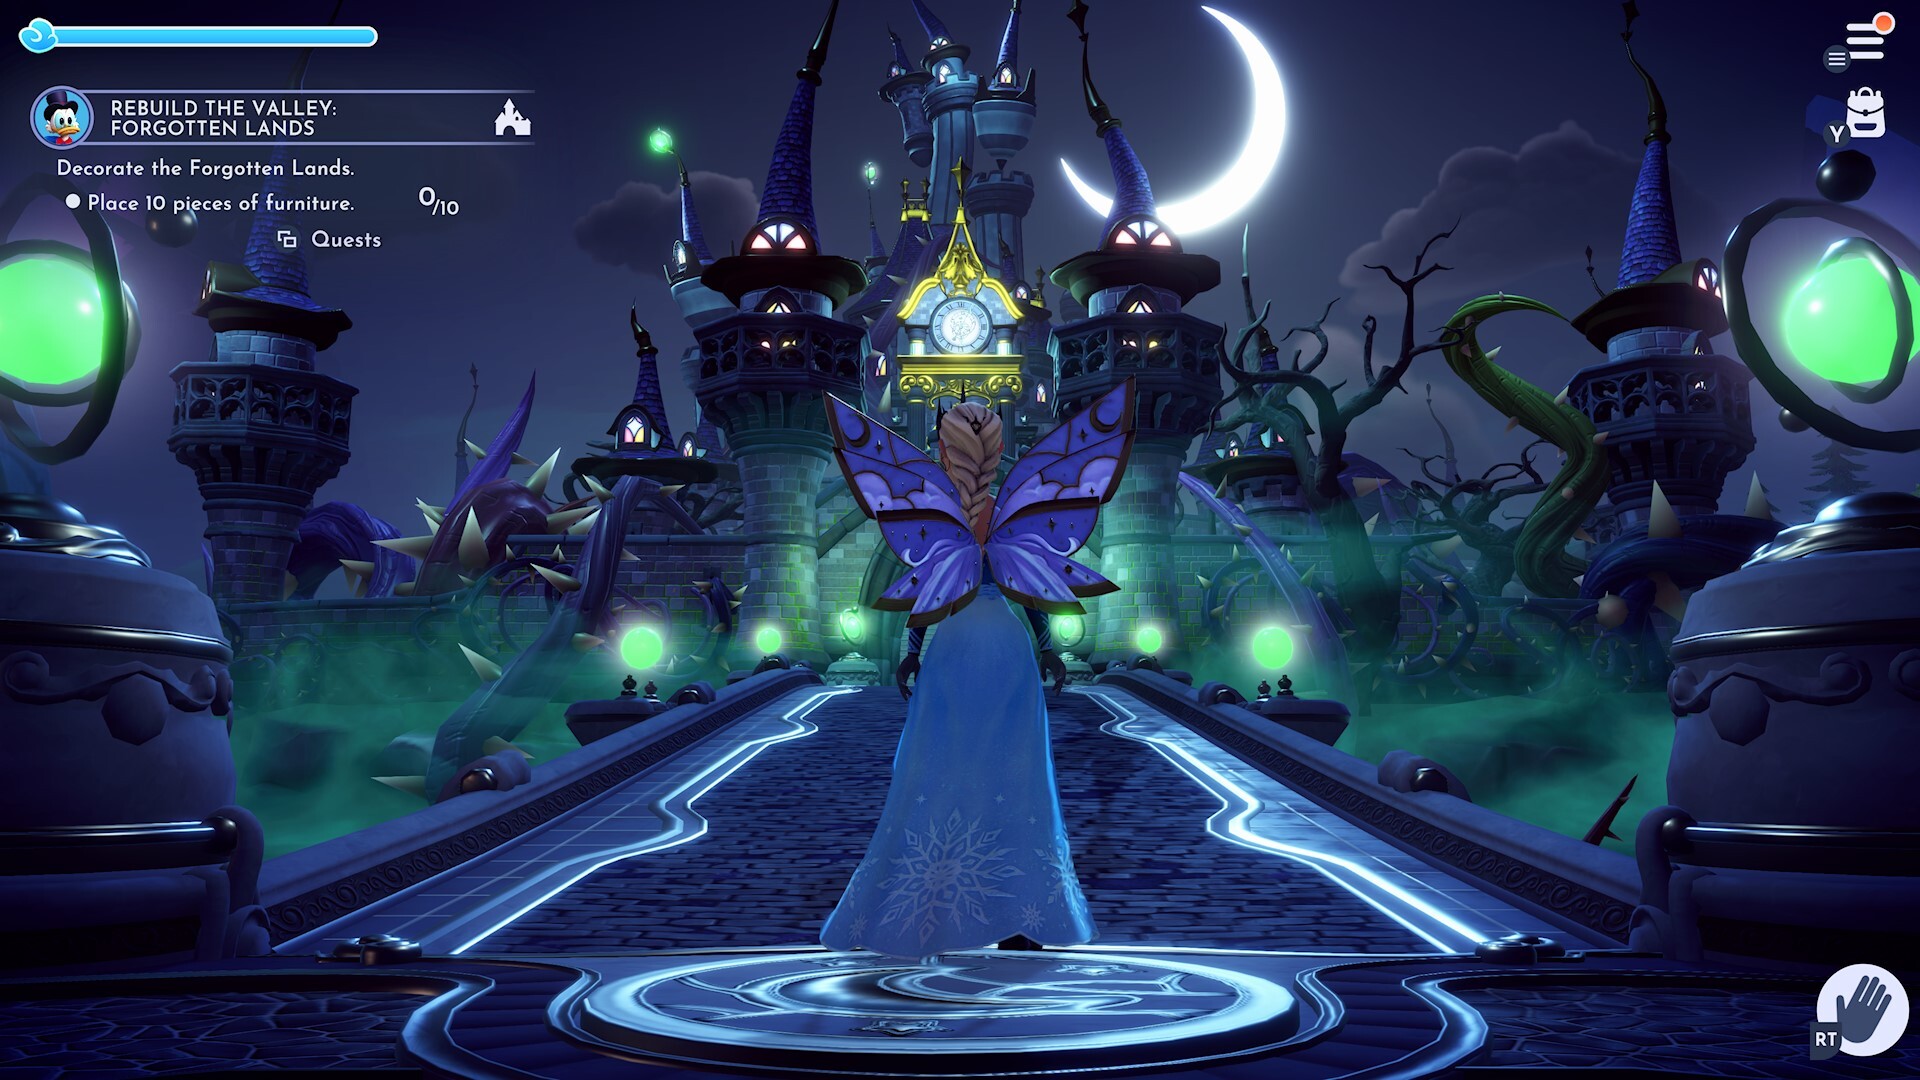 Best Of 2023: Disney Dreamlight Valley's Simple Gameplay Hides A